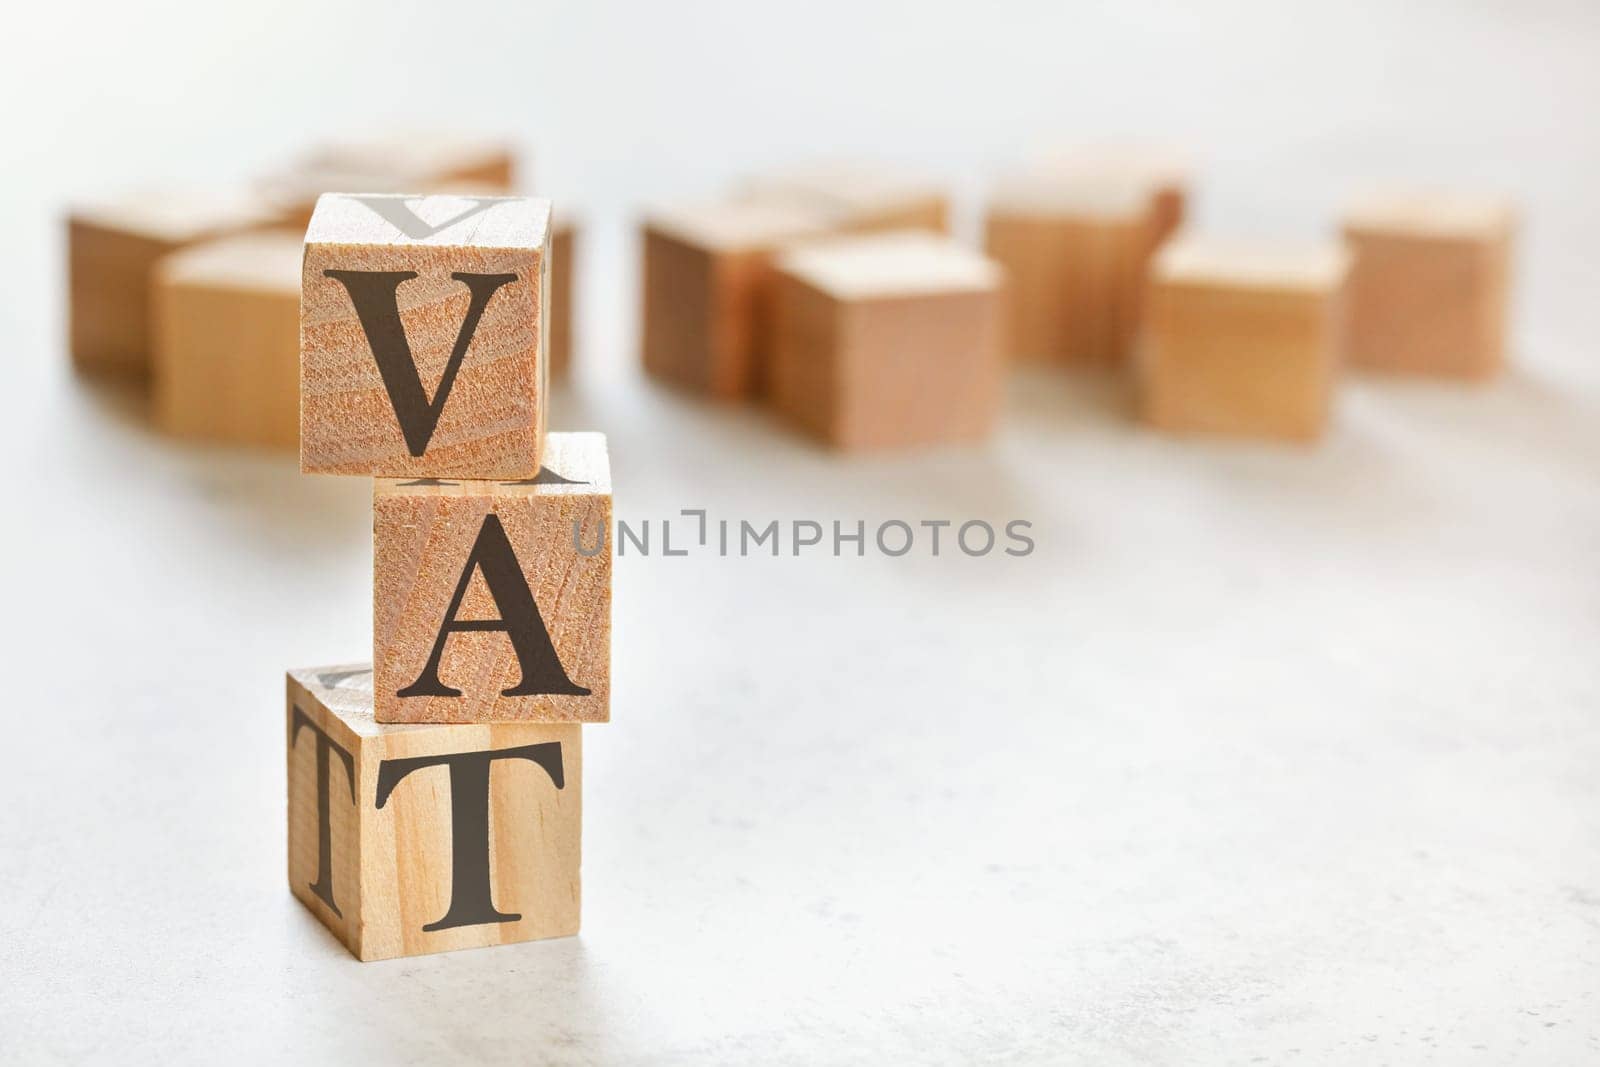 Three wooden cubes with letters VAT (means Value Added Tax), on white table, more in background, space for text in right down corner by Ivanko